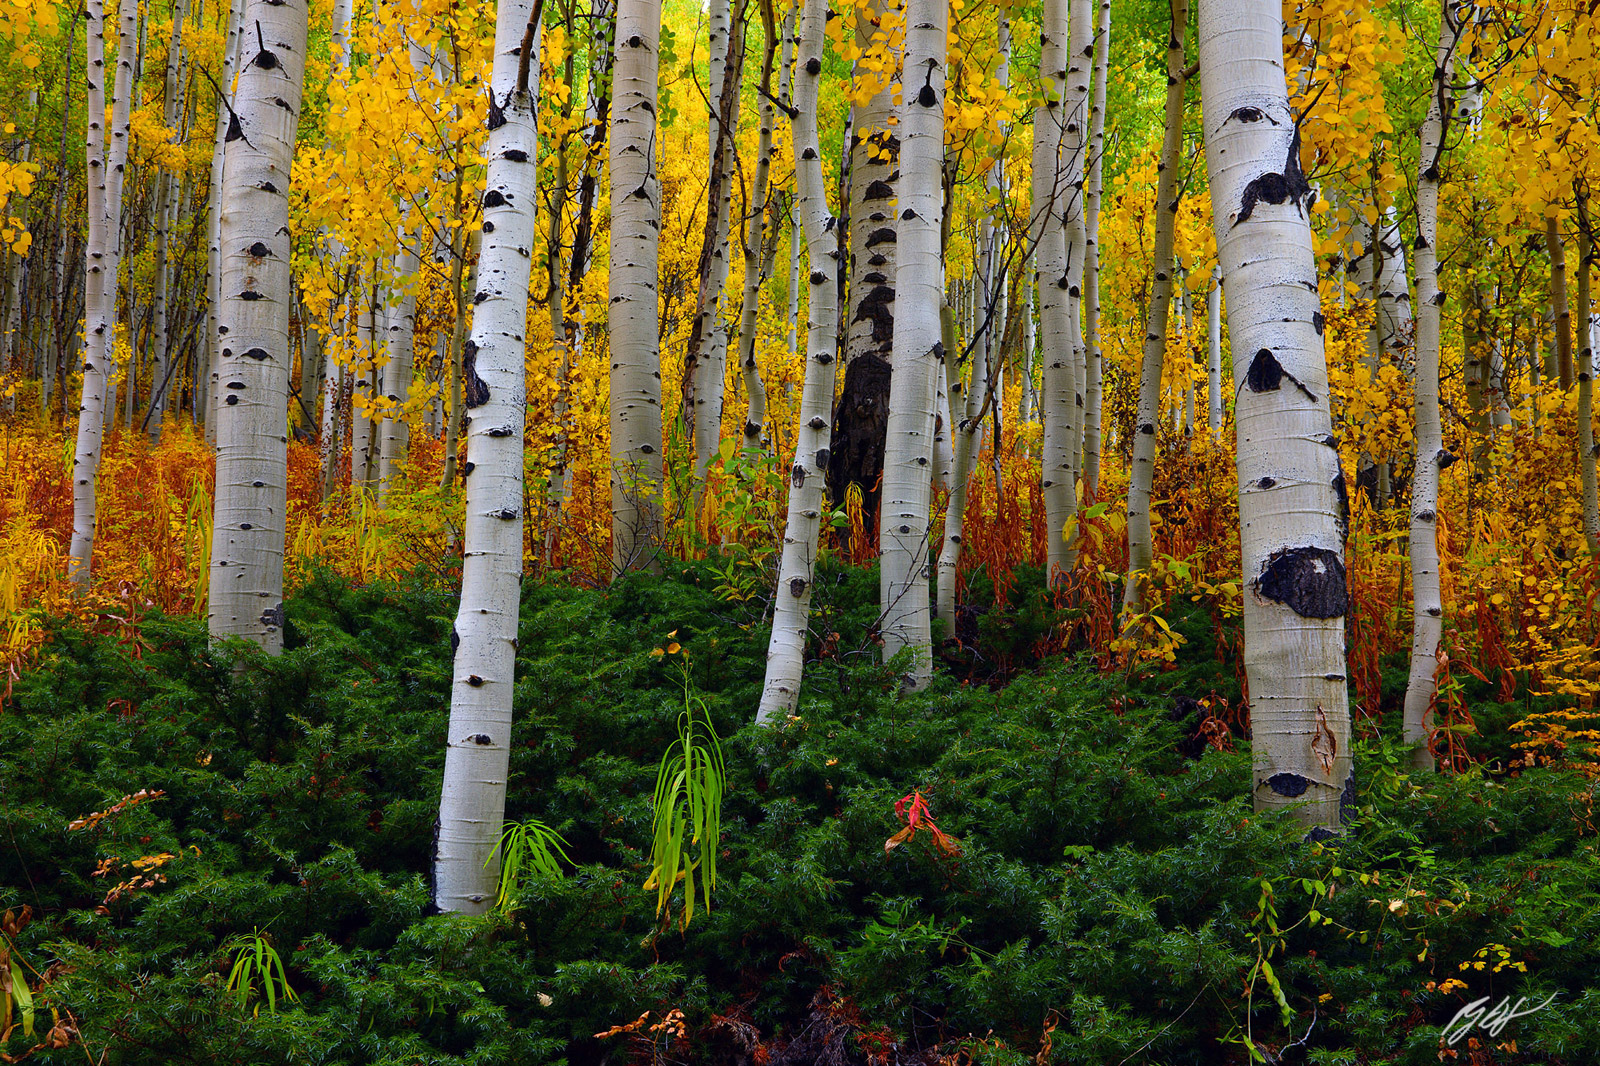 Fall Color and Aspens in the Maroon Bells-Snowmass Wilderness in Colorado